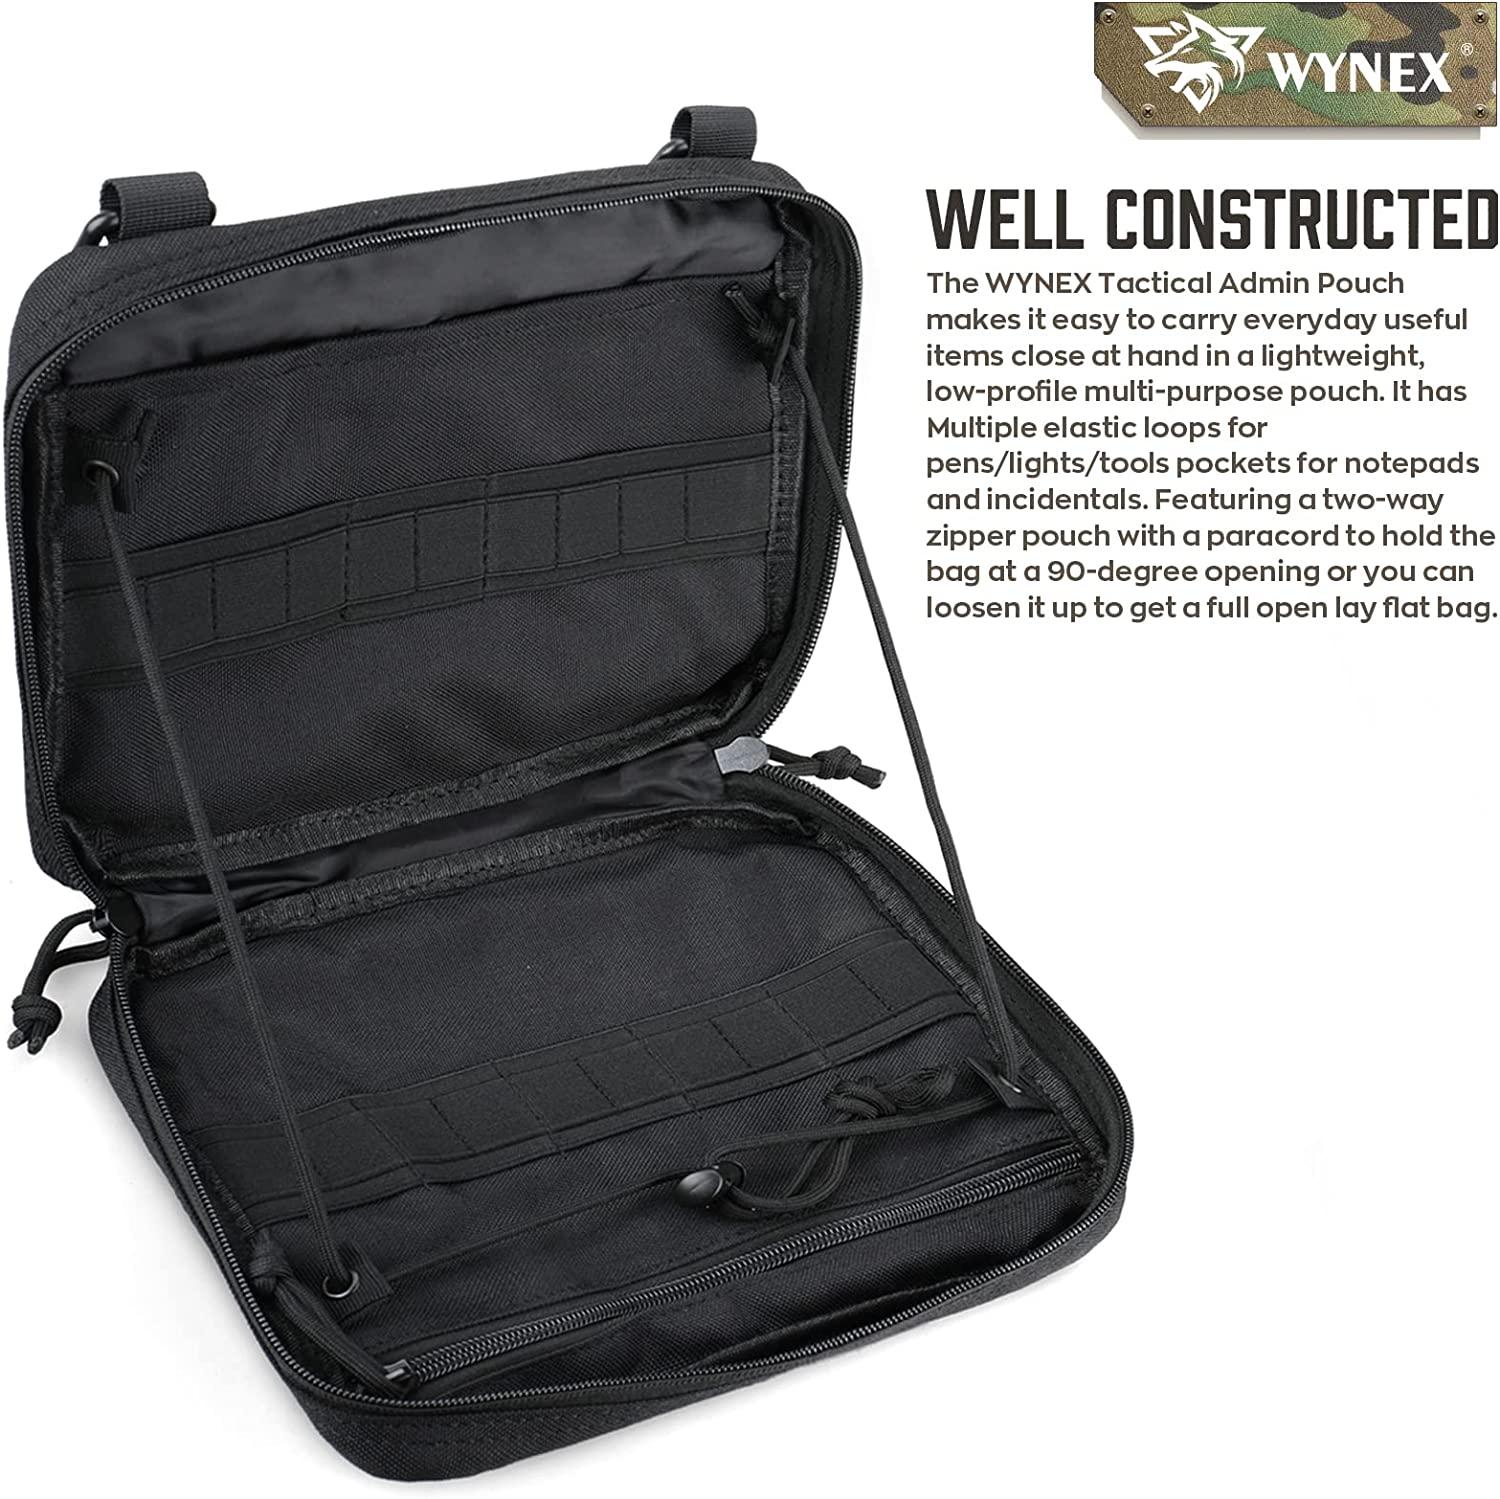  WYNEX Tactical Admin Molle Pouch, Medical EDC EMT Utility Bag  Shell Design Attachment Pouches Hiking Belt Bags : Sports & Outdoors